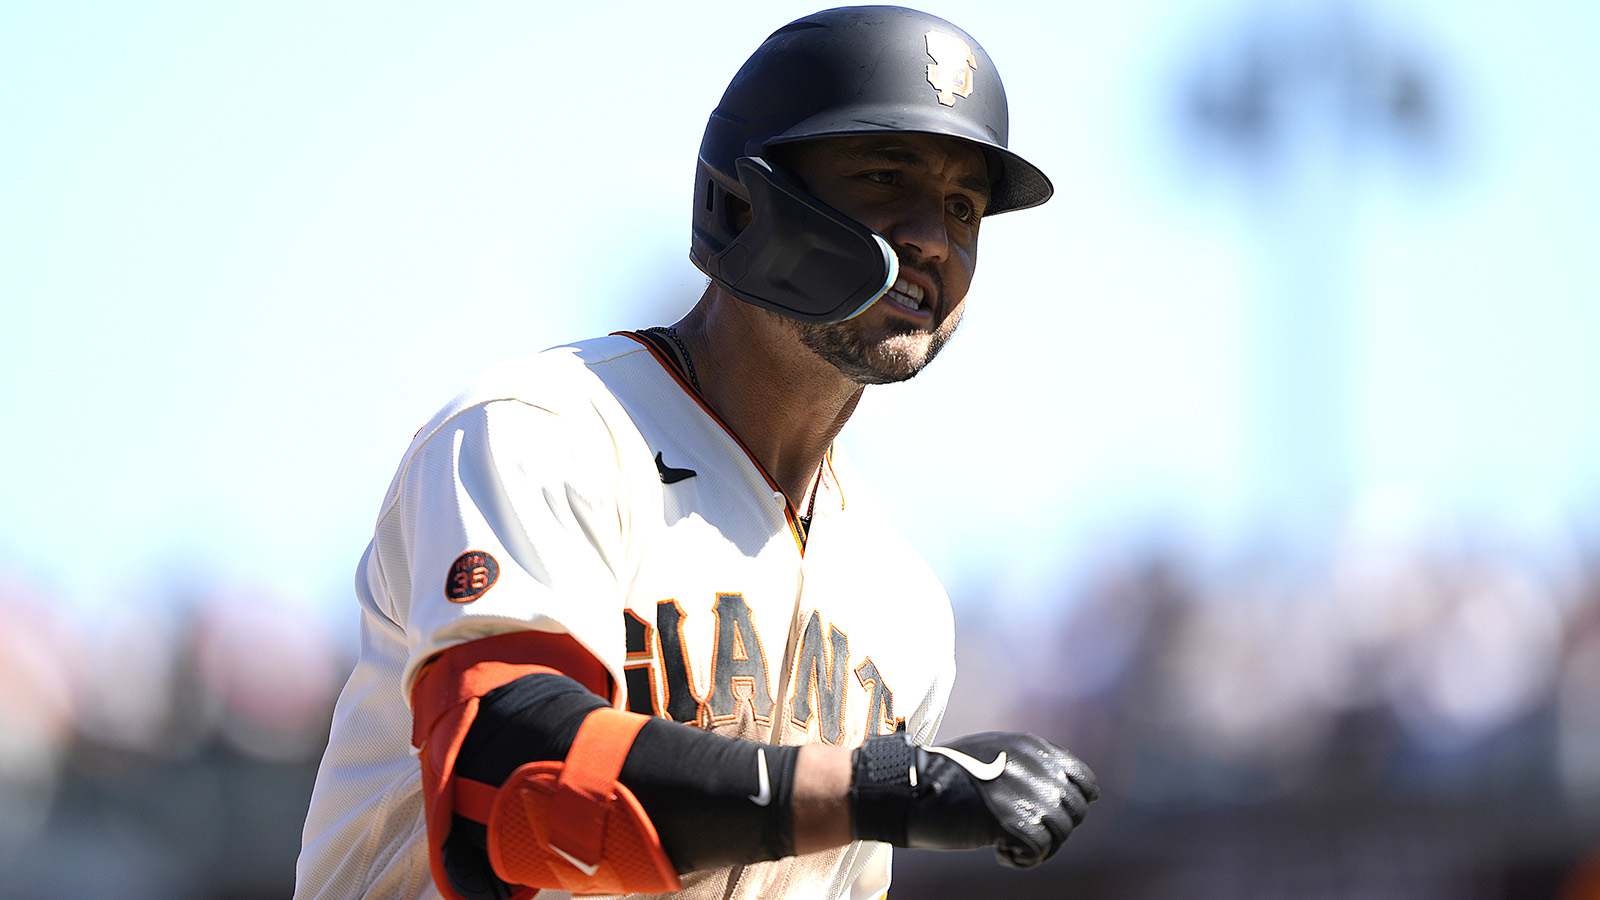 SF Giants injuries: Michael Conforto to IL, Heliot Ramos recalled